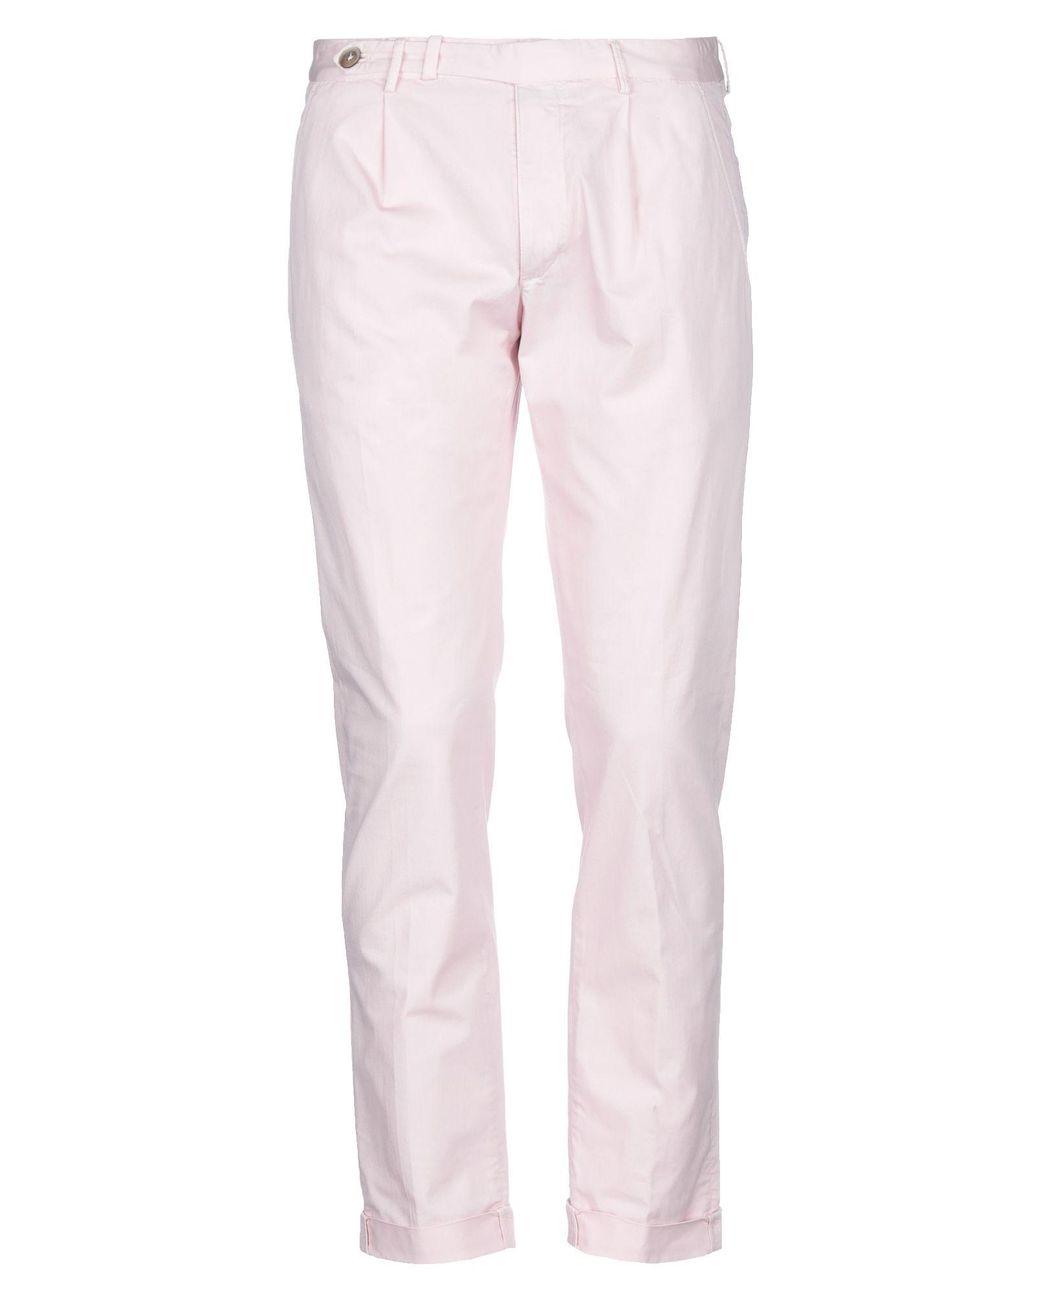 GTA IL PANTALONE Cotton Casual Pants in Pink for Men - Lyst